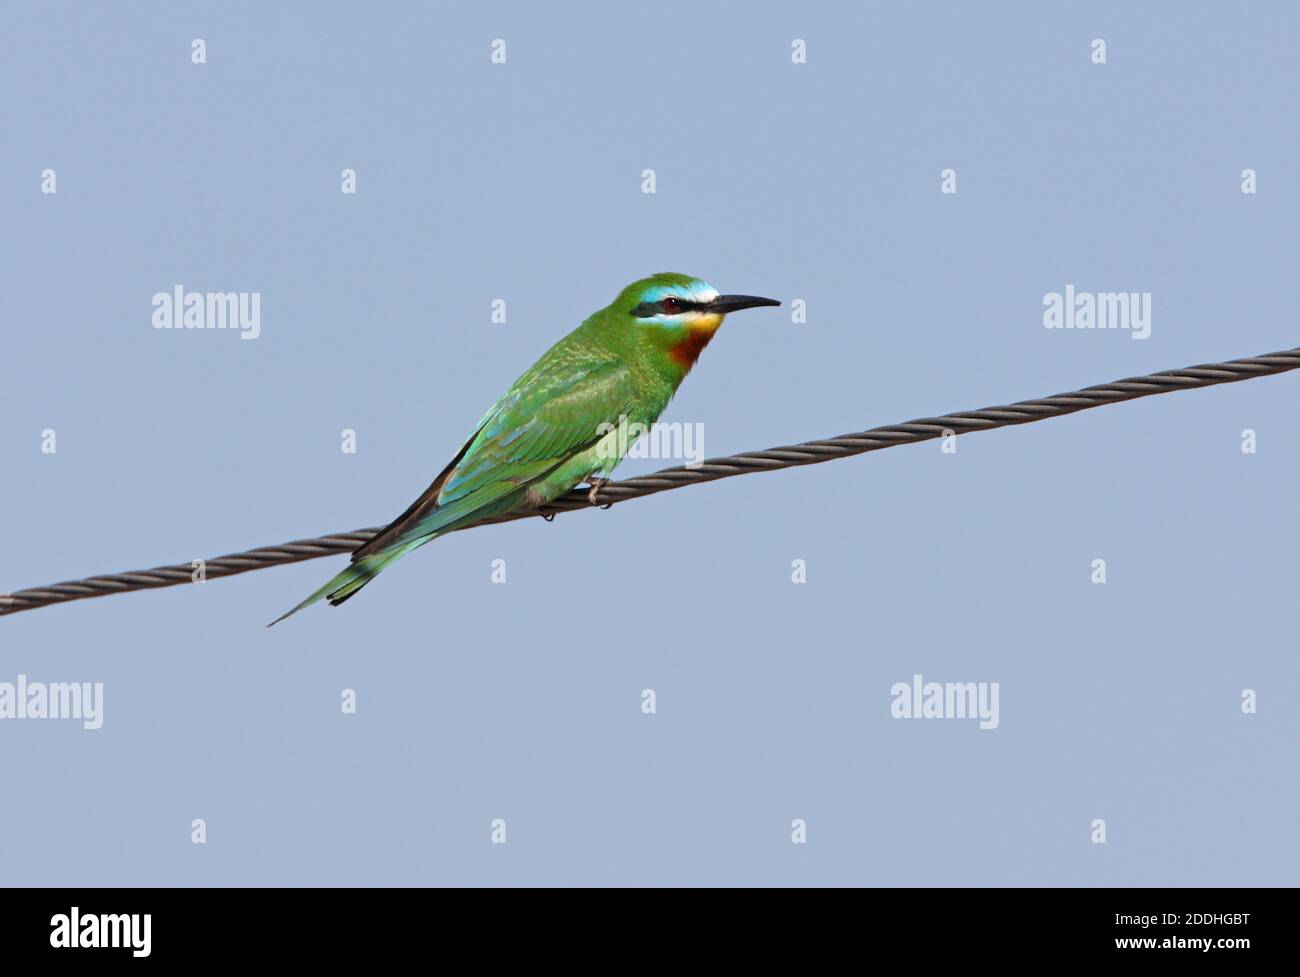 Blue-cheeked Bee-eater (Merops persicus persicus) adult perched on power-line   Lake Balkhash, Kazakhstan           June Stock Photo